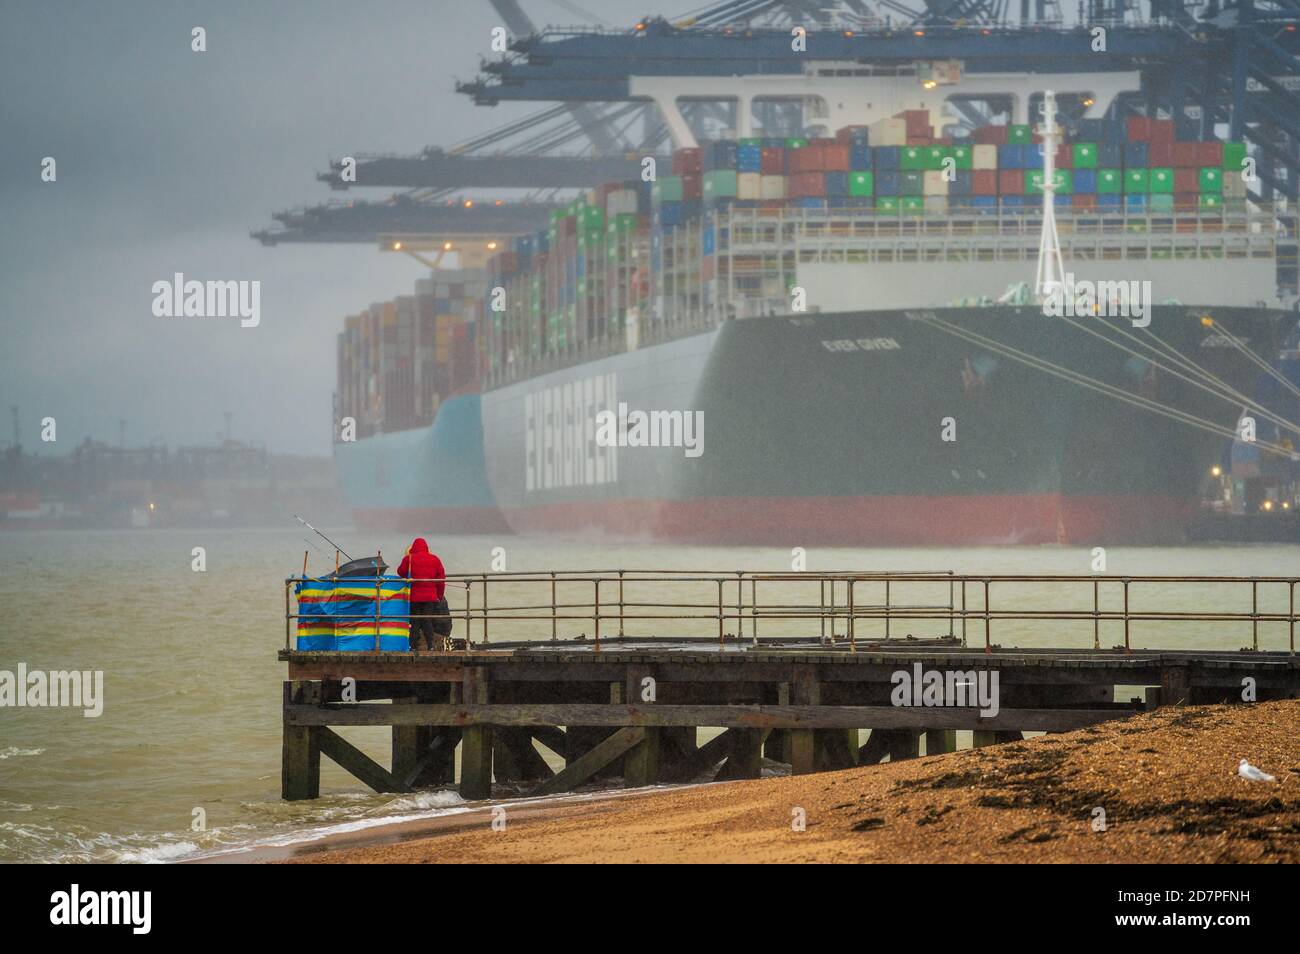 Sea Fishing in the rain in the shadow of large container ships unloading at  Felixstowe Port. Port of Felixstowe sea fishing. Stock Photo